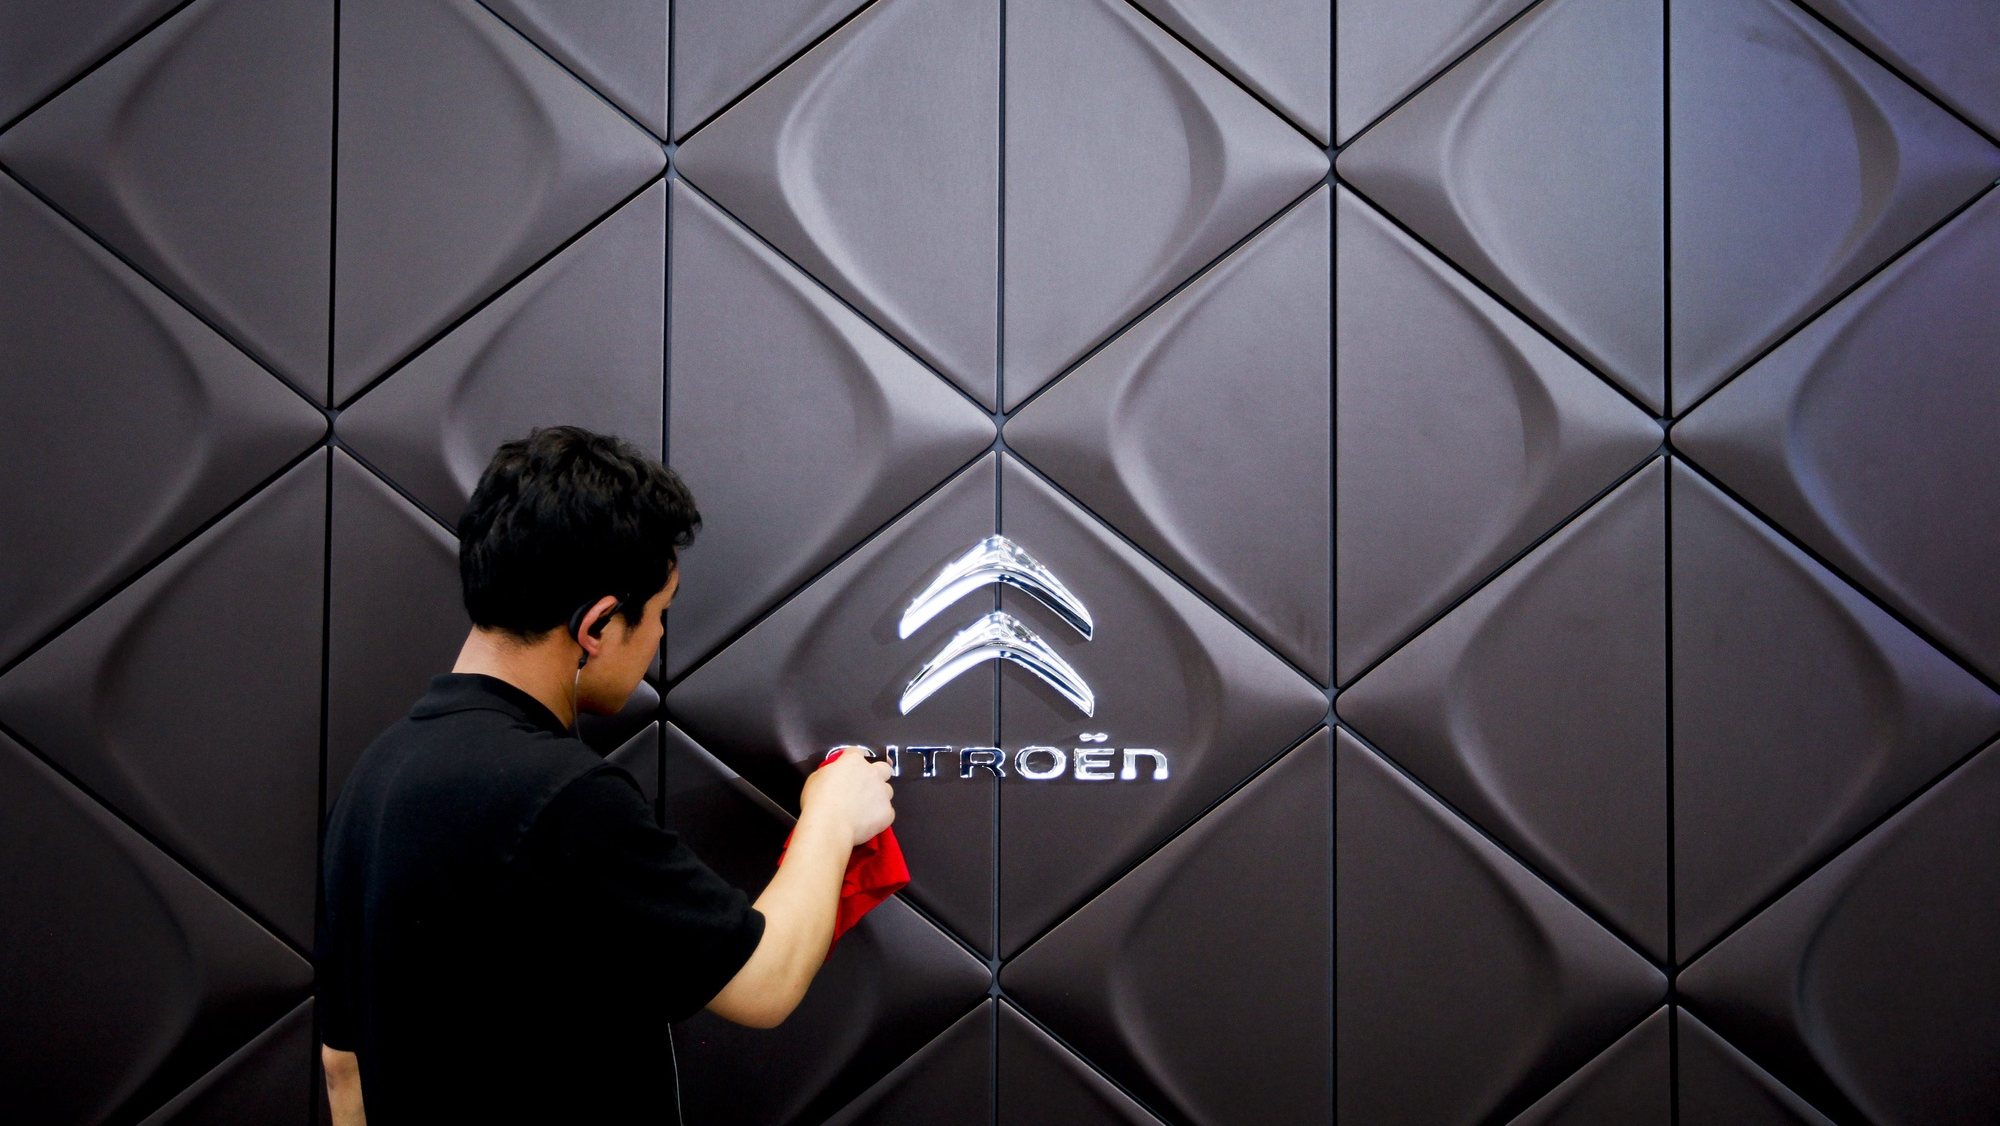 epa03194481 A man cleans the Citroen logo at the Auto China Show 2012 in Beijing, China, 24 April 2012. China&#039;s leading car show opened in Beijing on 23 April with automakers from around the world presenting more than a thousand car models. The automobile exhibition will run until 02 May. Annual sales growth dropped in 2011 to less than three percent after years of more than 20 percent increases. The total number of car sales in China for the year 2011 is reported in local media as 18.5 million with forecasts that the figure will reach 30 million by 2020.  EPA/DIEGO AZUBEL